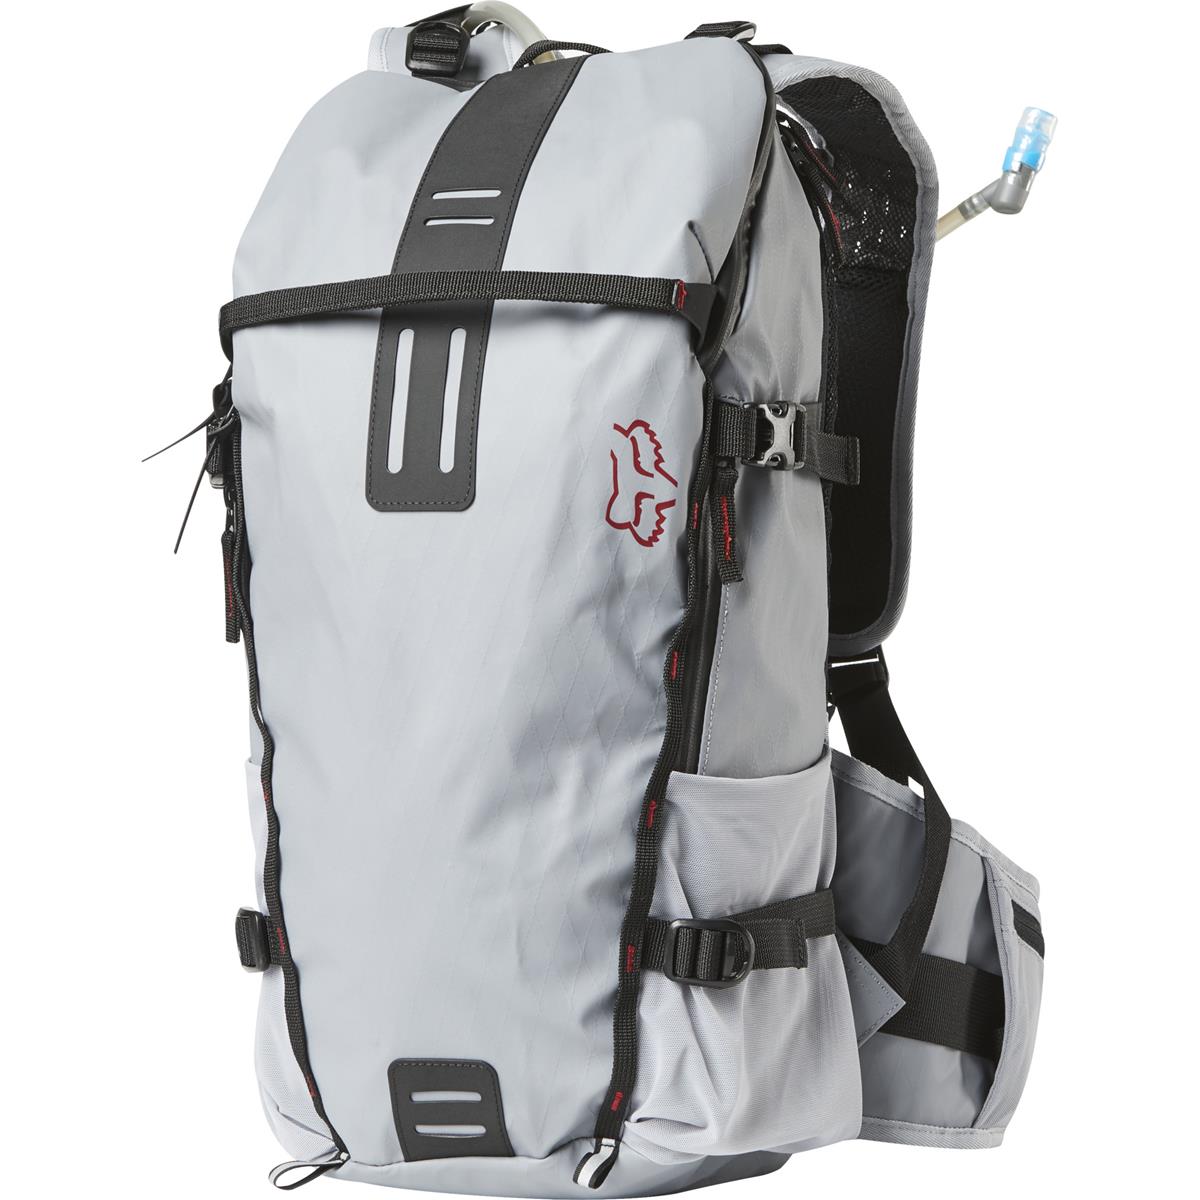 Fox Backpack with Hydration System Compartment Utility Steel Gray